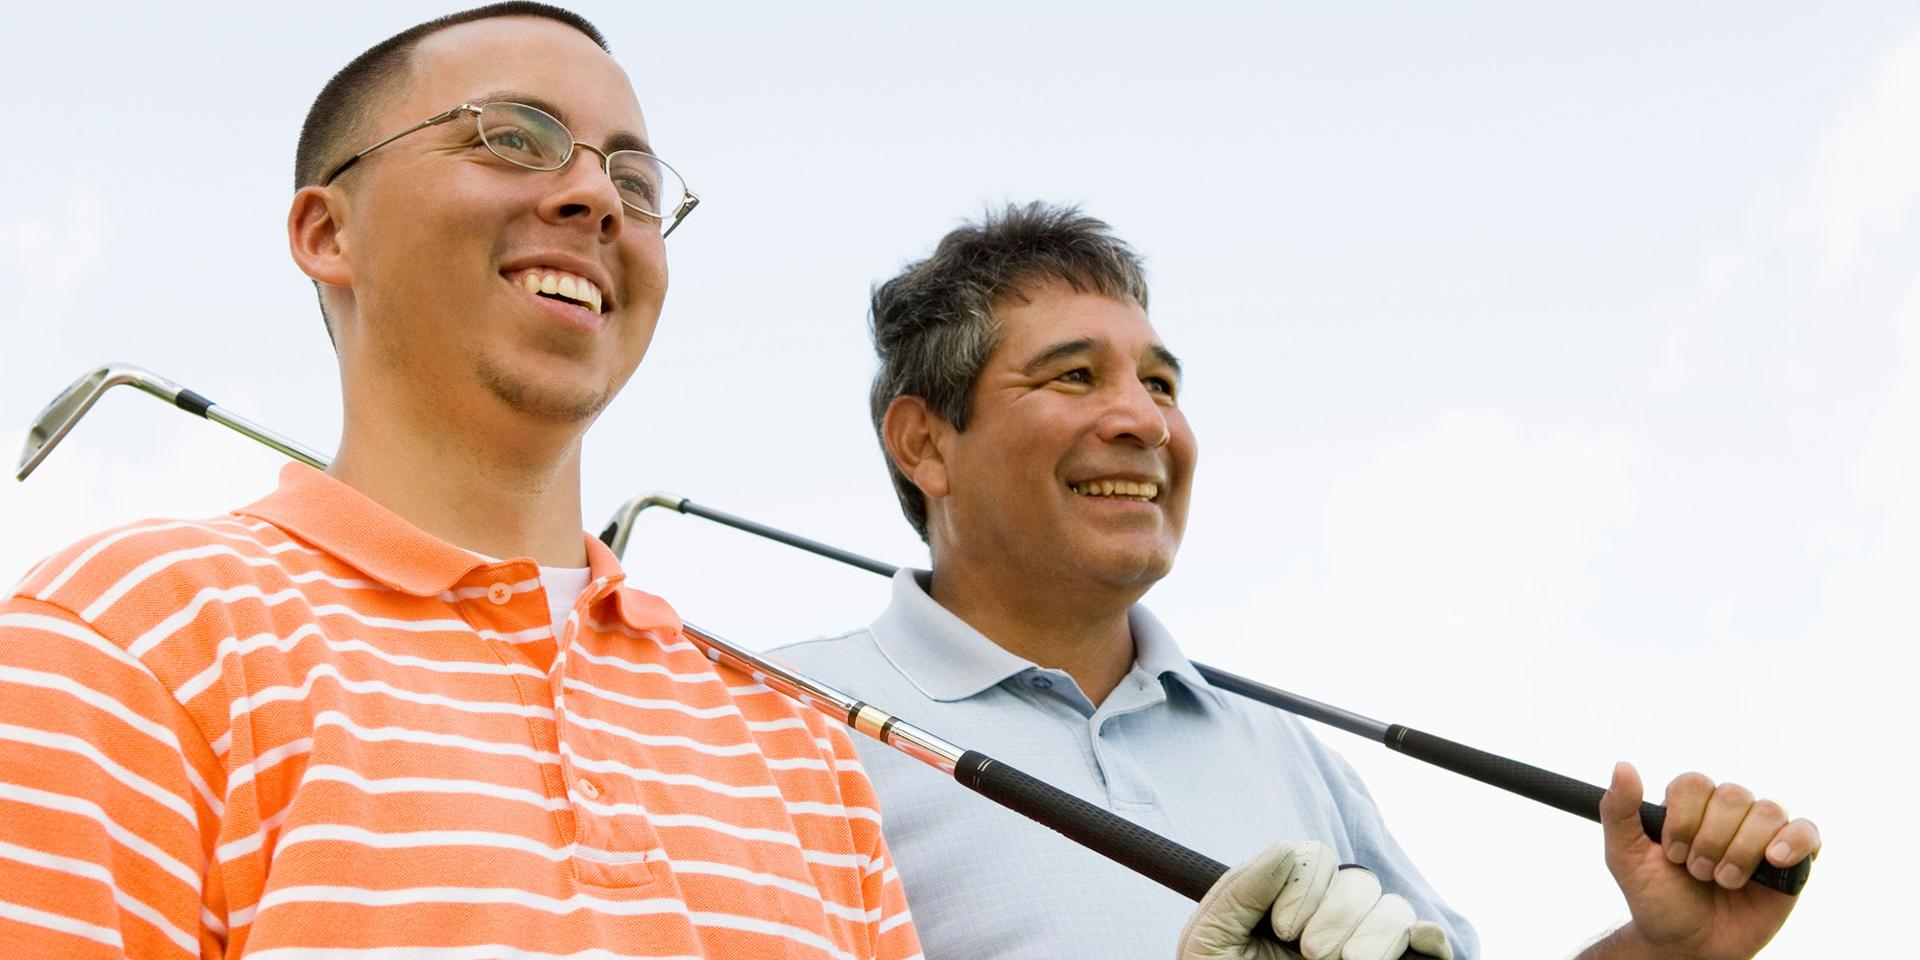 The perfect spectacles for golfers 